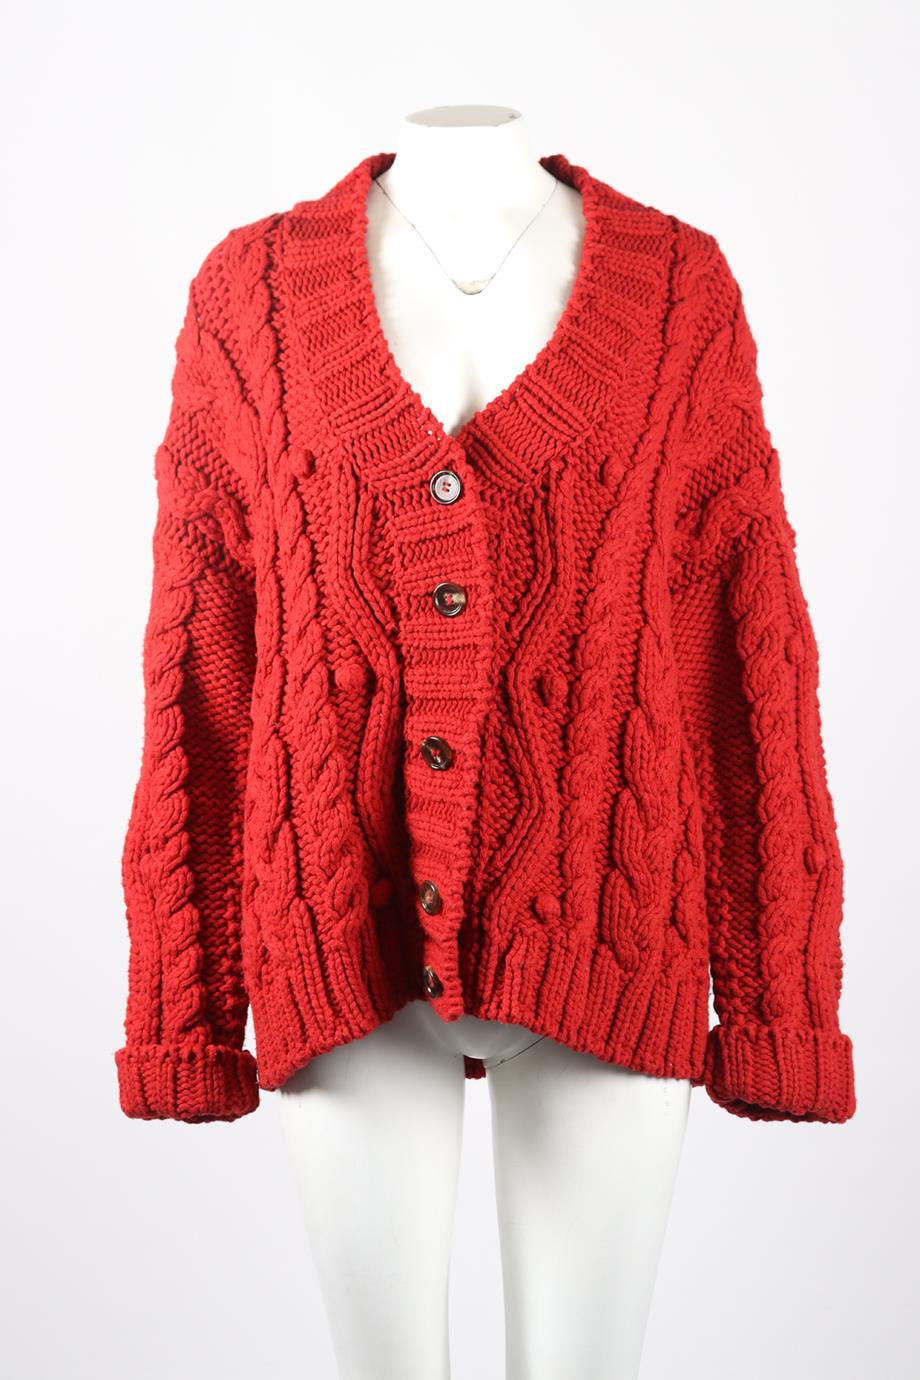 DOLCE AND GABBANA CABLE KNIT WOOL CARDIGAN IT 38 UK 6